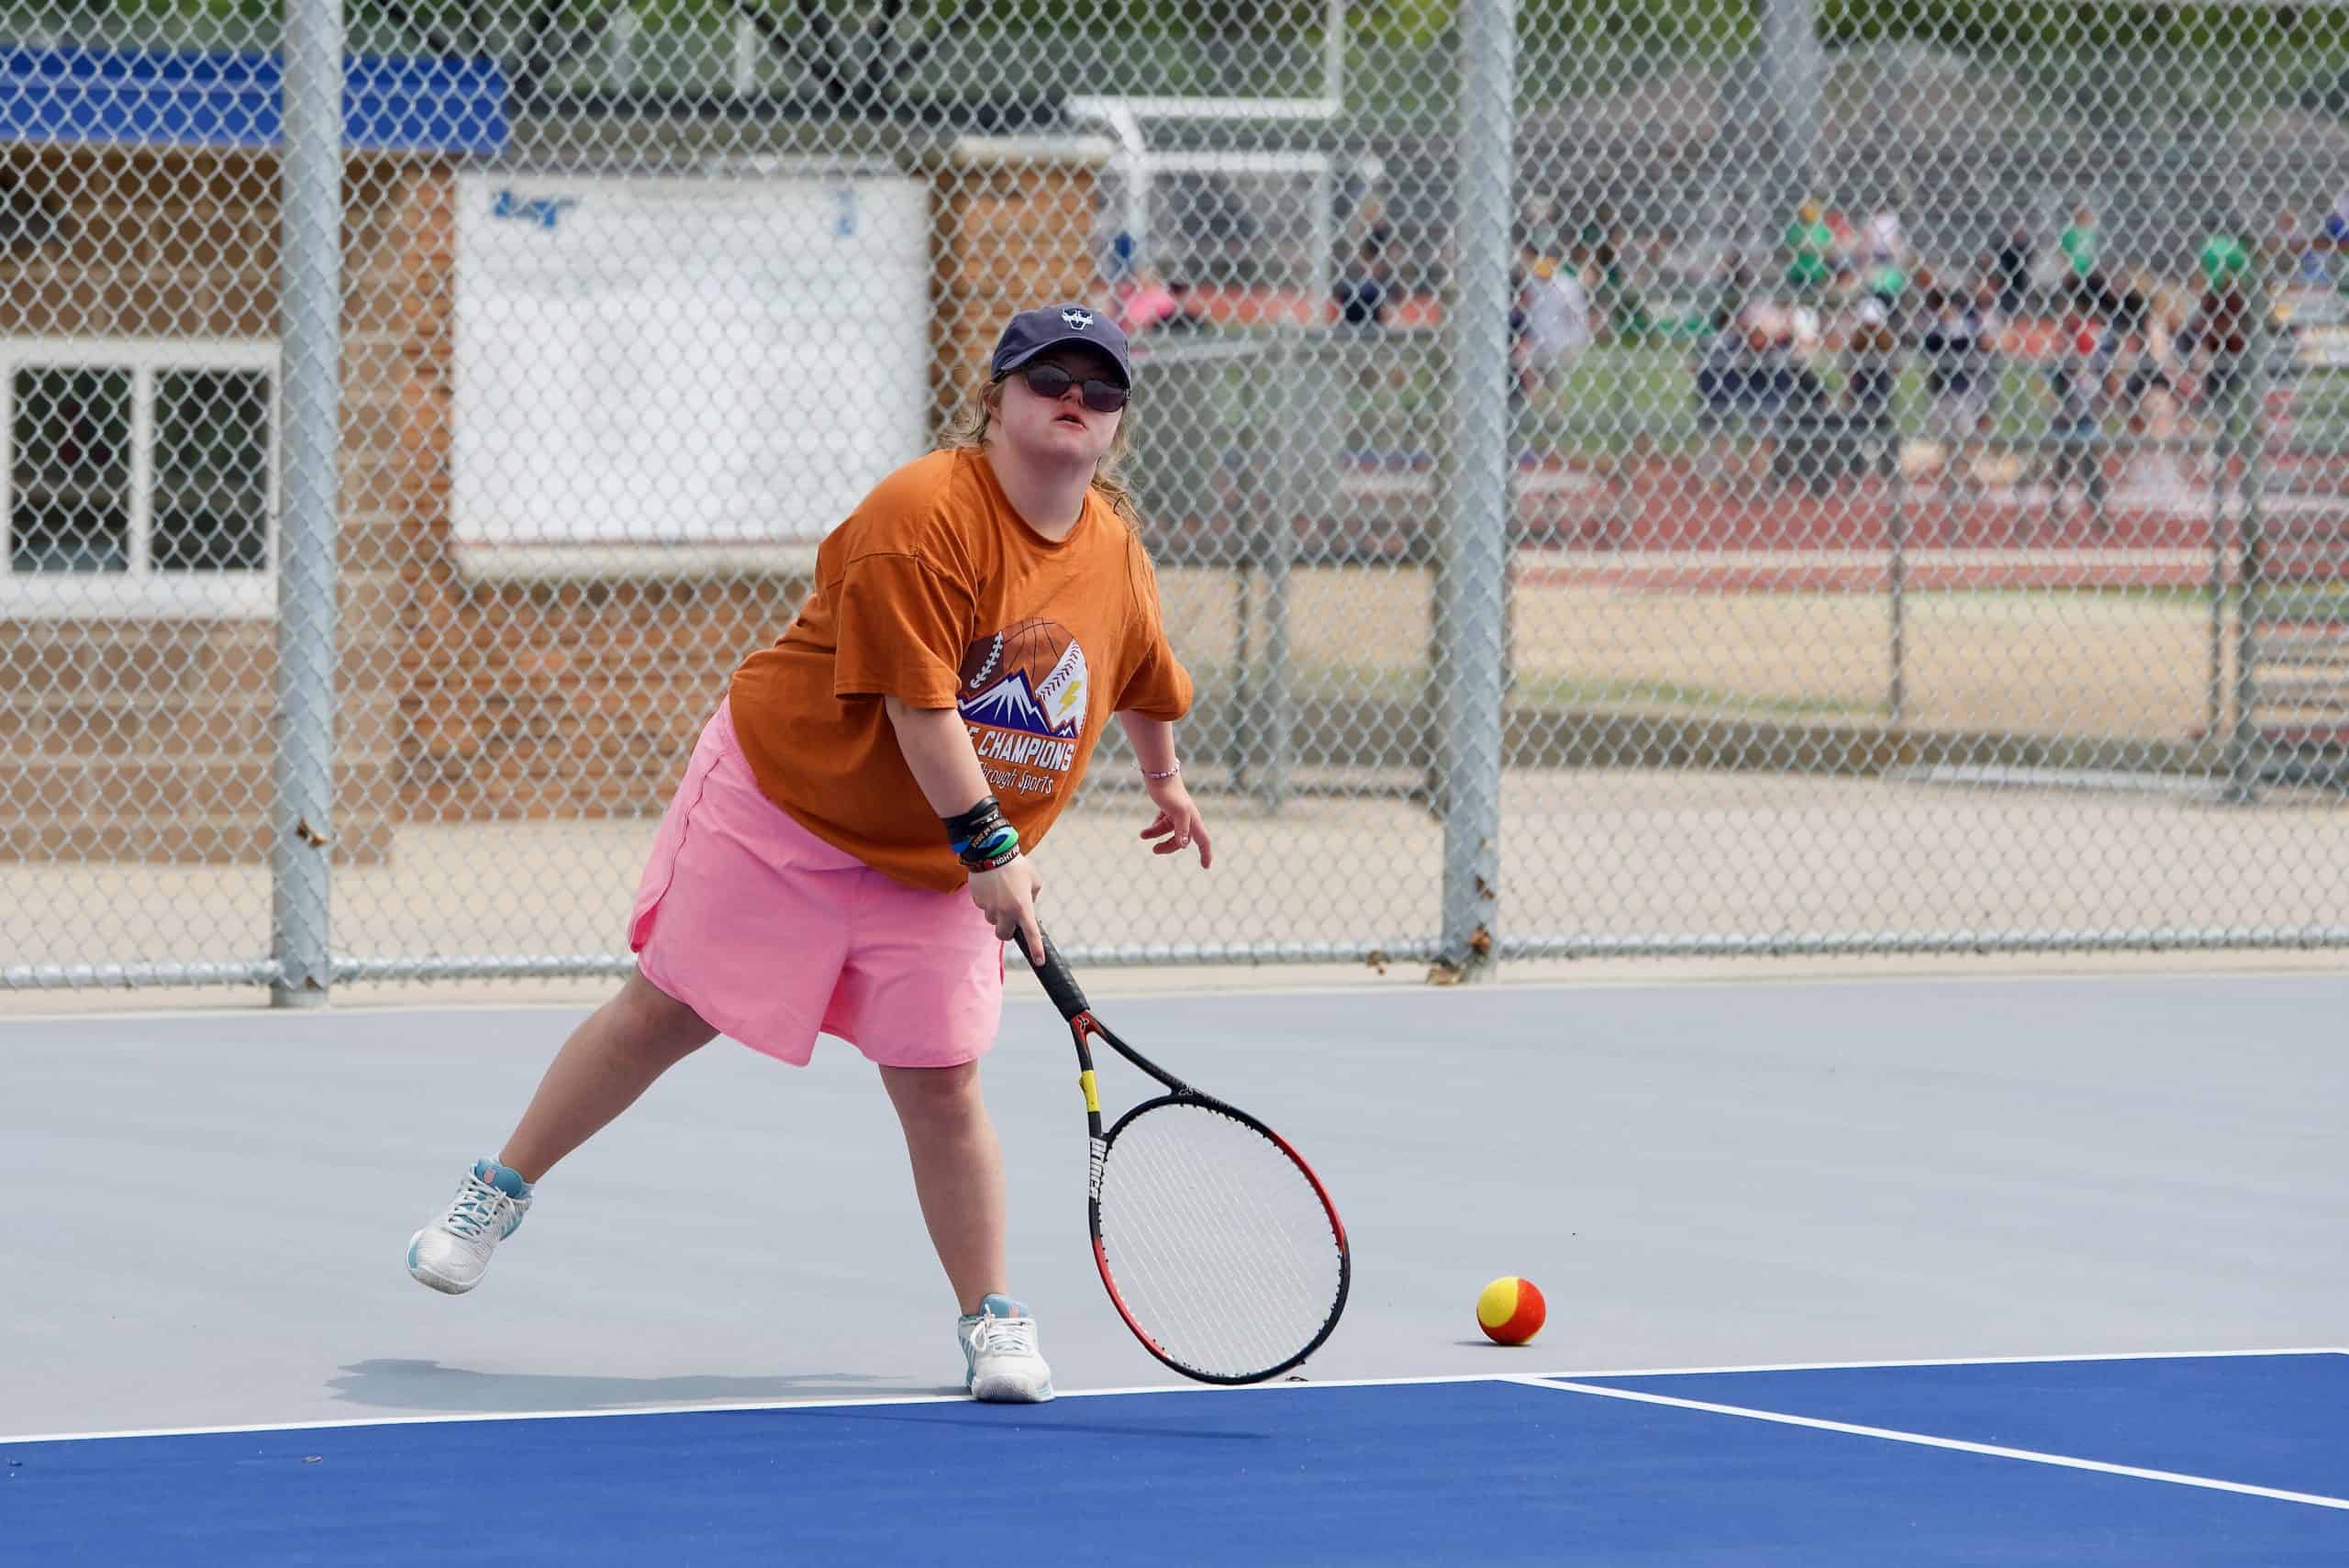 Female high school on a tennis court serving a tennis ball. She's wearing shorts, a Unified Day of Champions t-shirt, and a baseball hat.